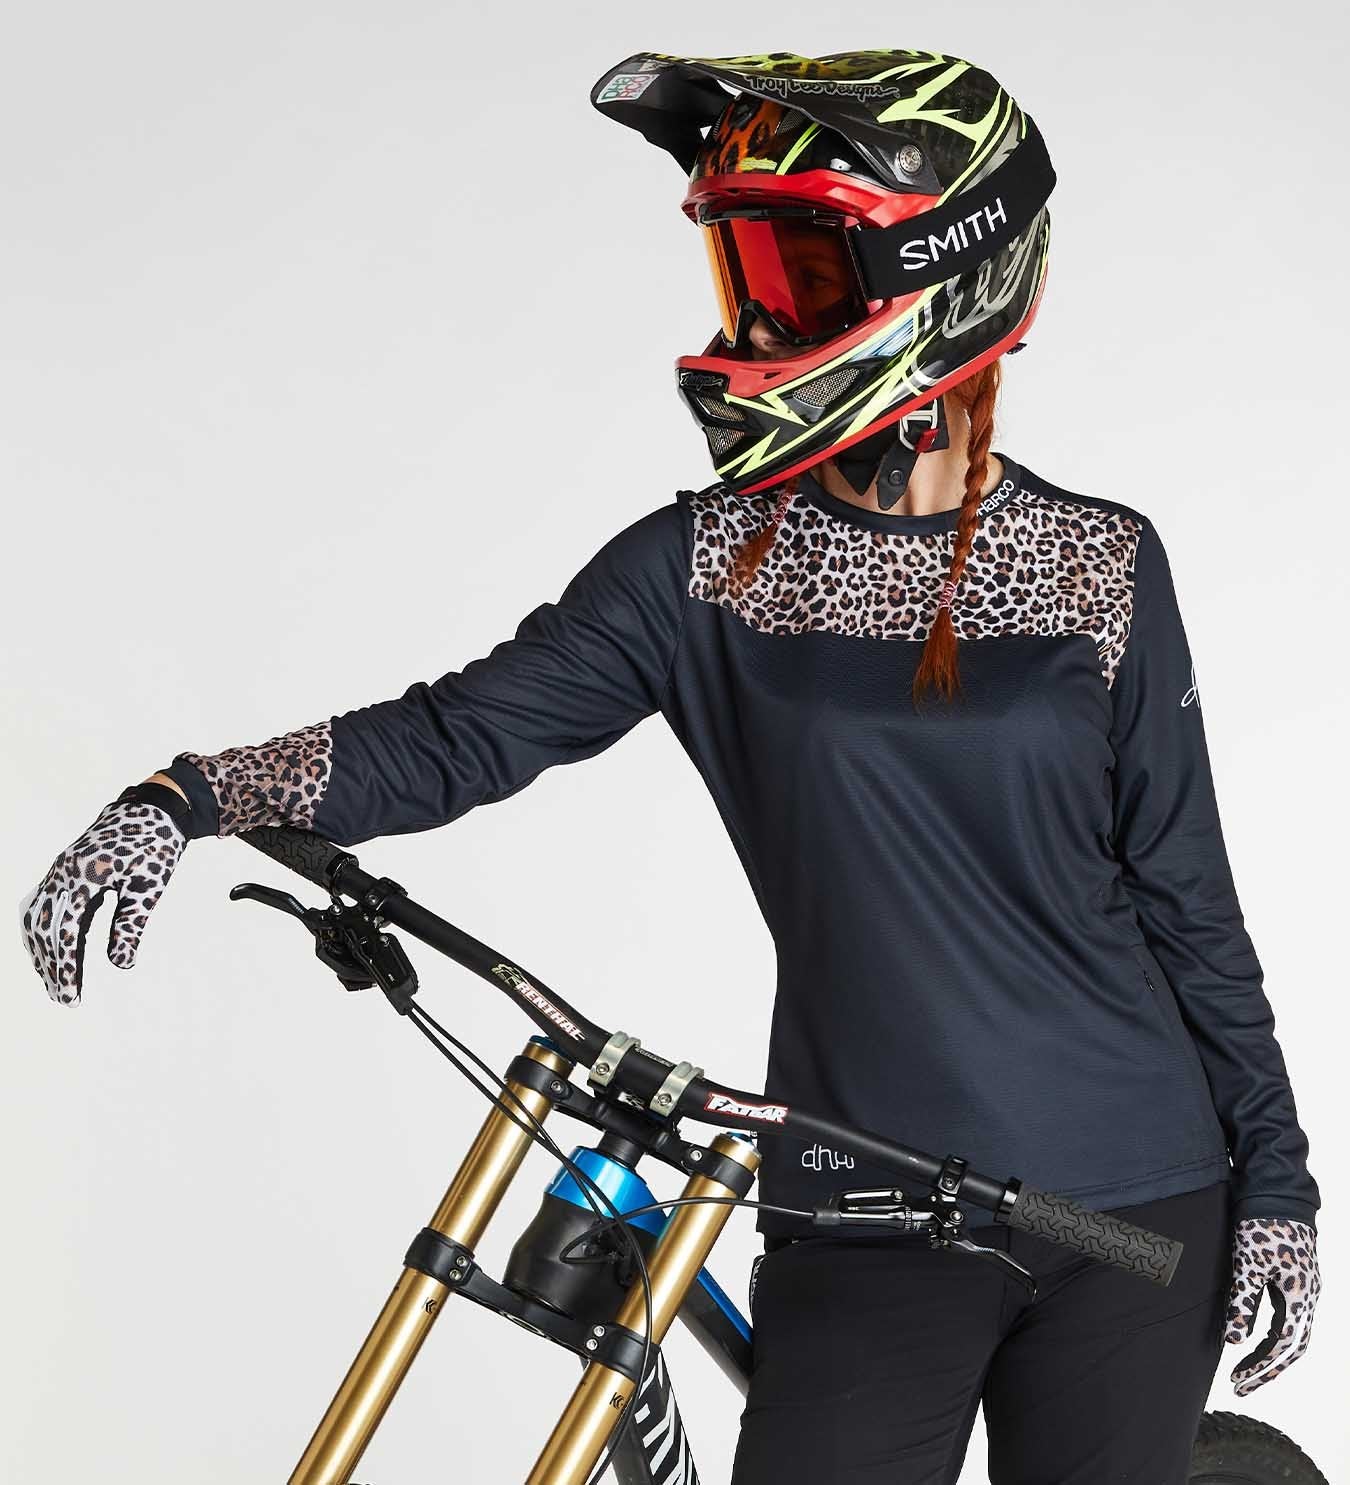 DHaRCO Ladies Long Sleeve Gravity Jersey - Leopard